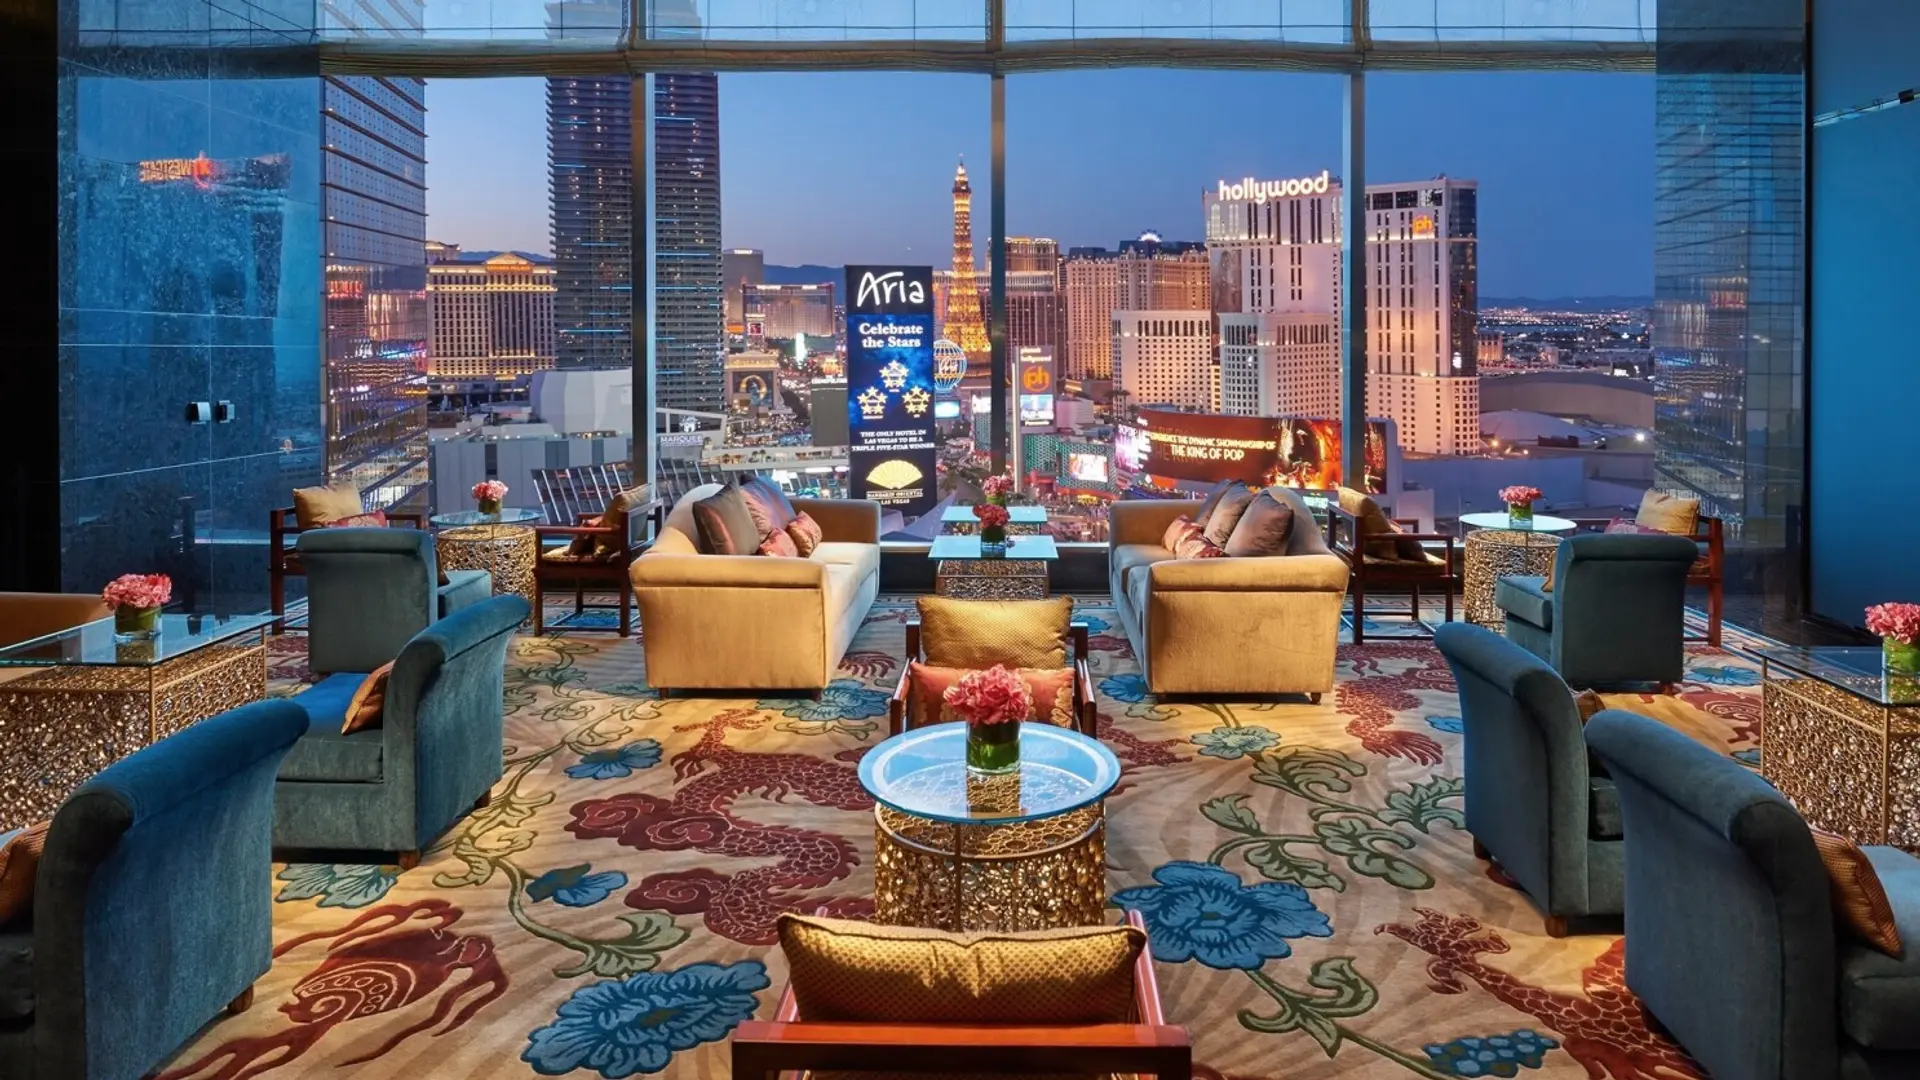 Lounge with rose carpet in beige, red and blue, seatings and furniture in blue and beige and a giant view to the city.